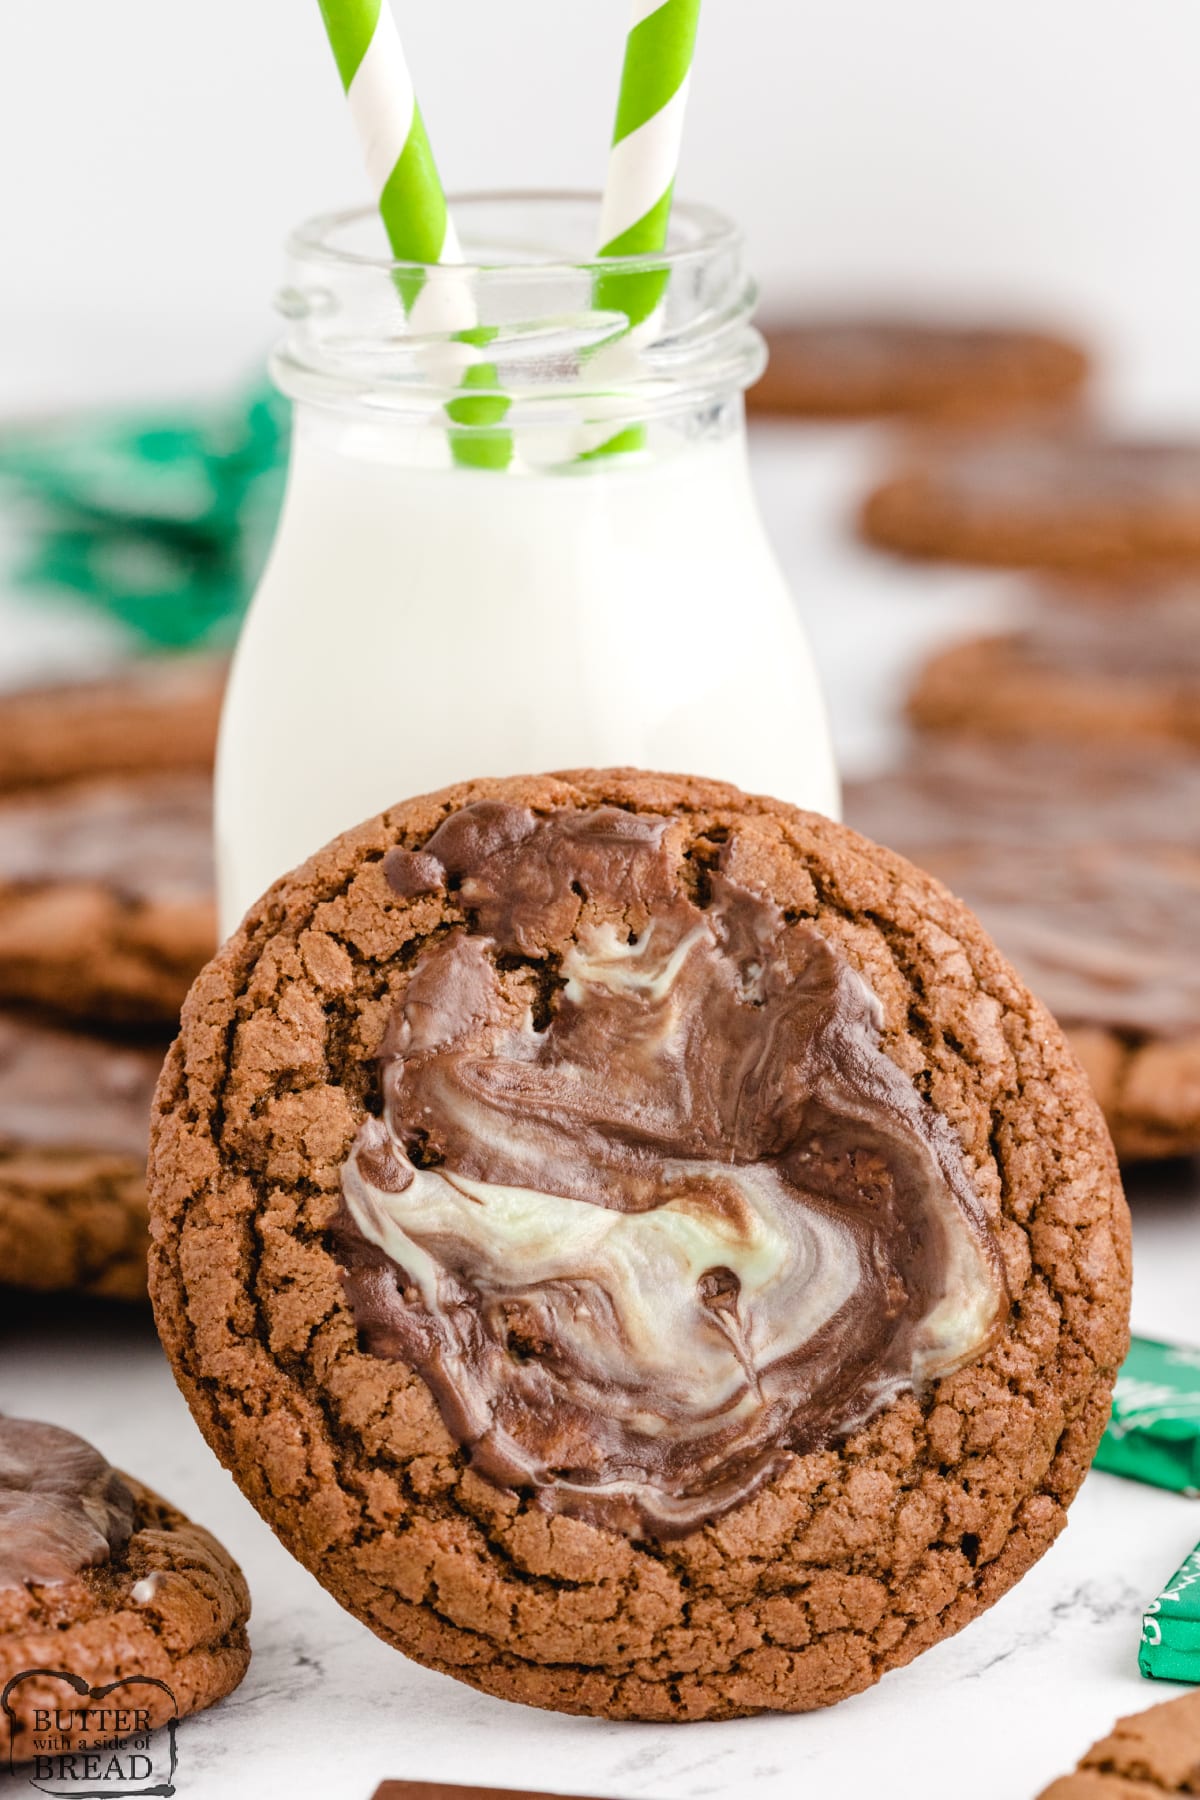 Mint chocolate cookie with glass of milk.